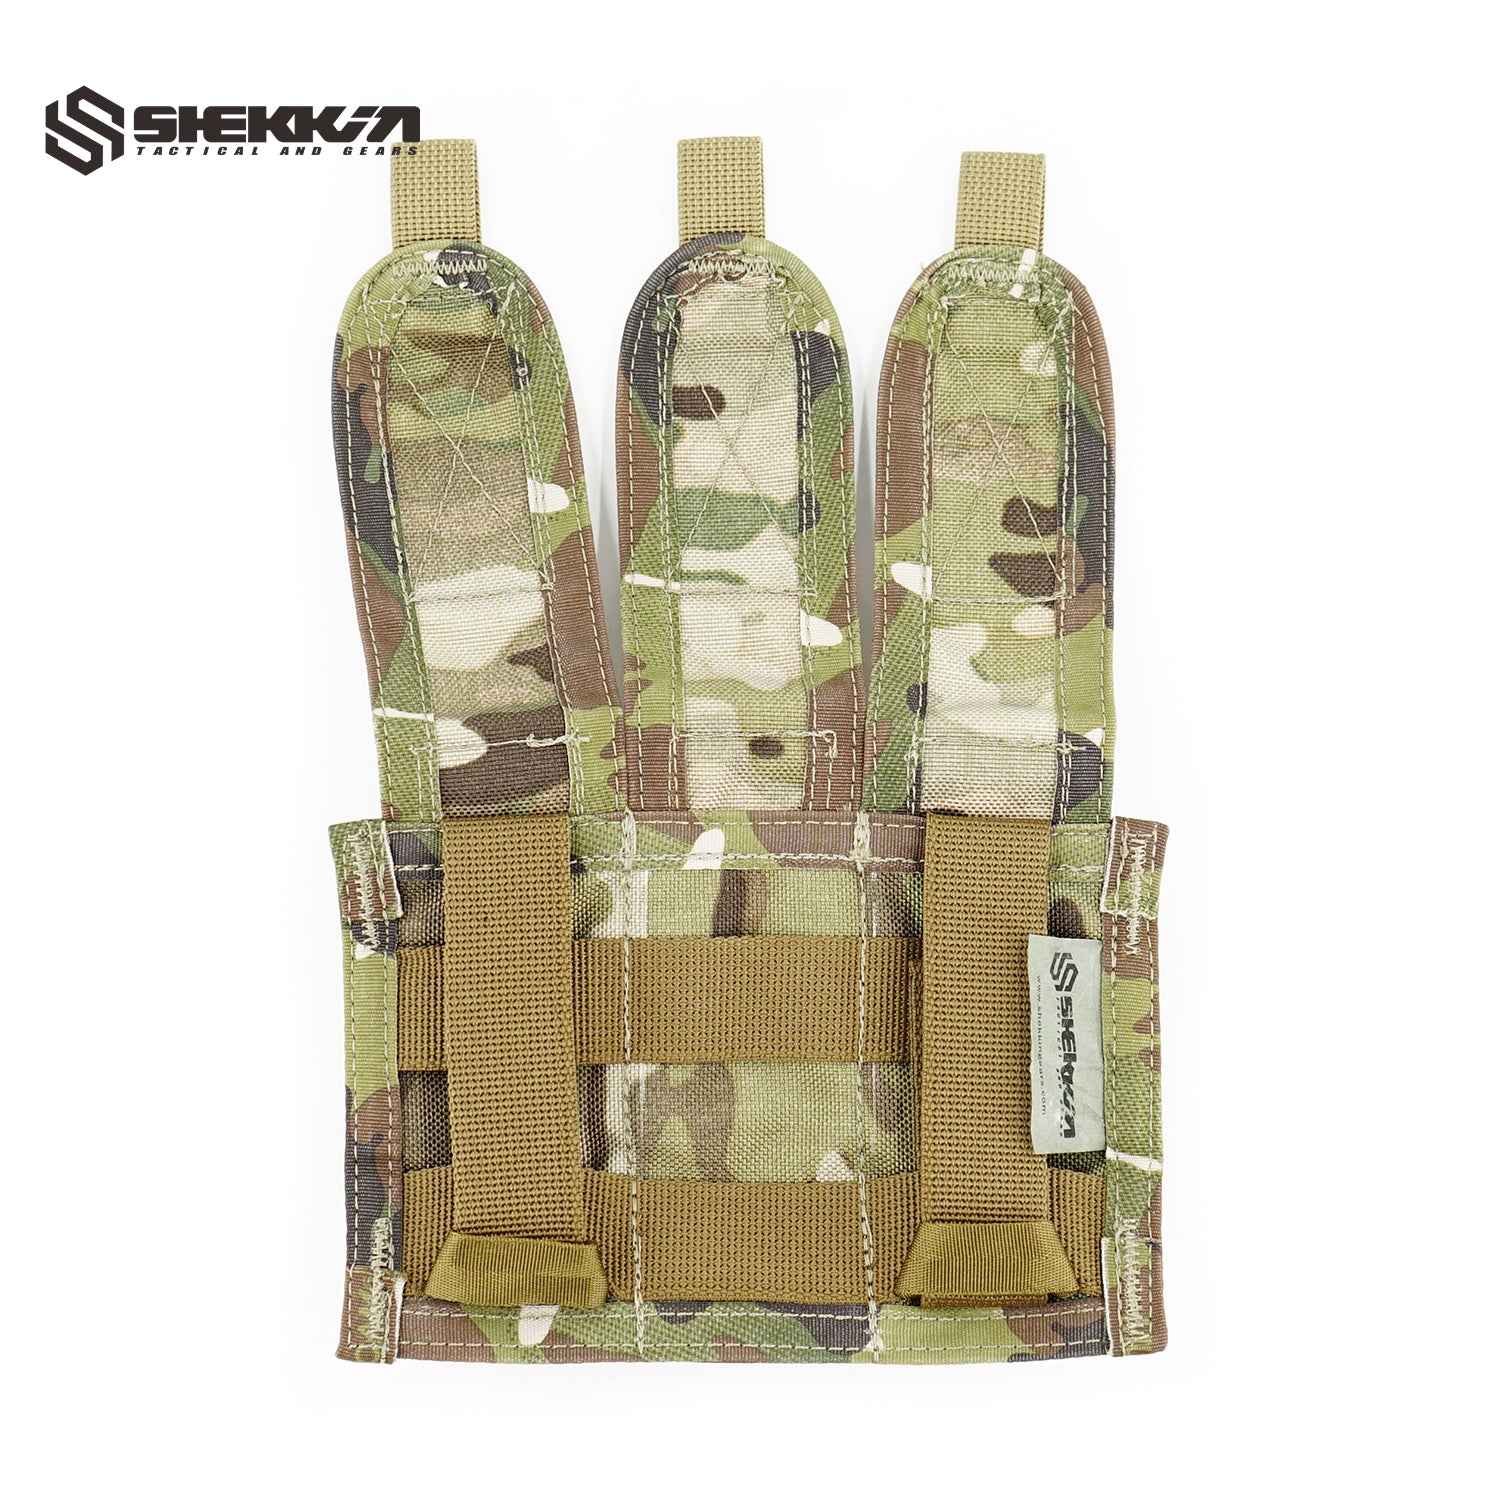 Multicam Paraclete style riple flashbang pouch - Shekkin Gears